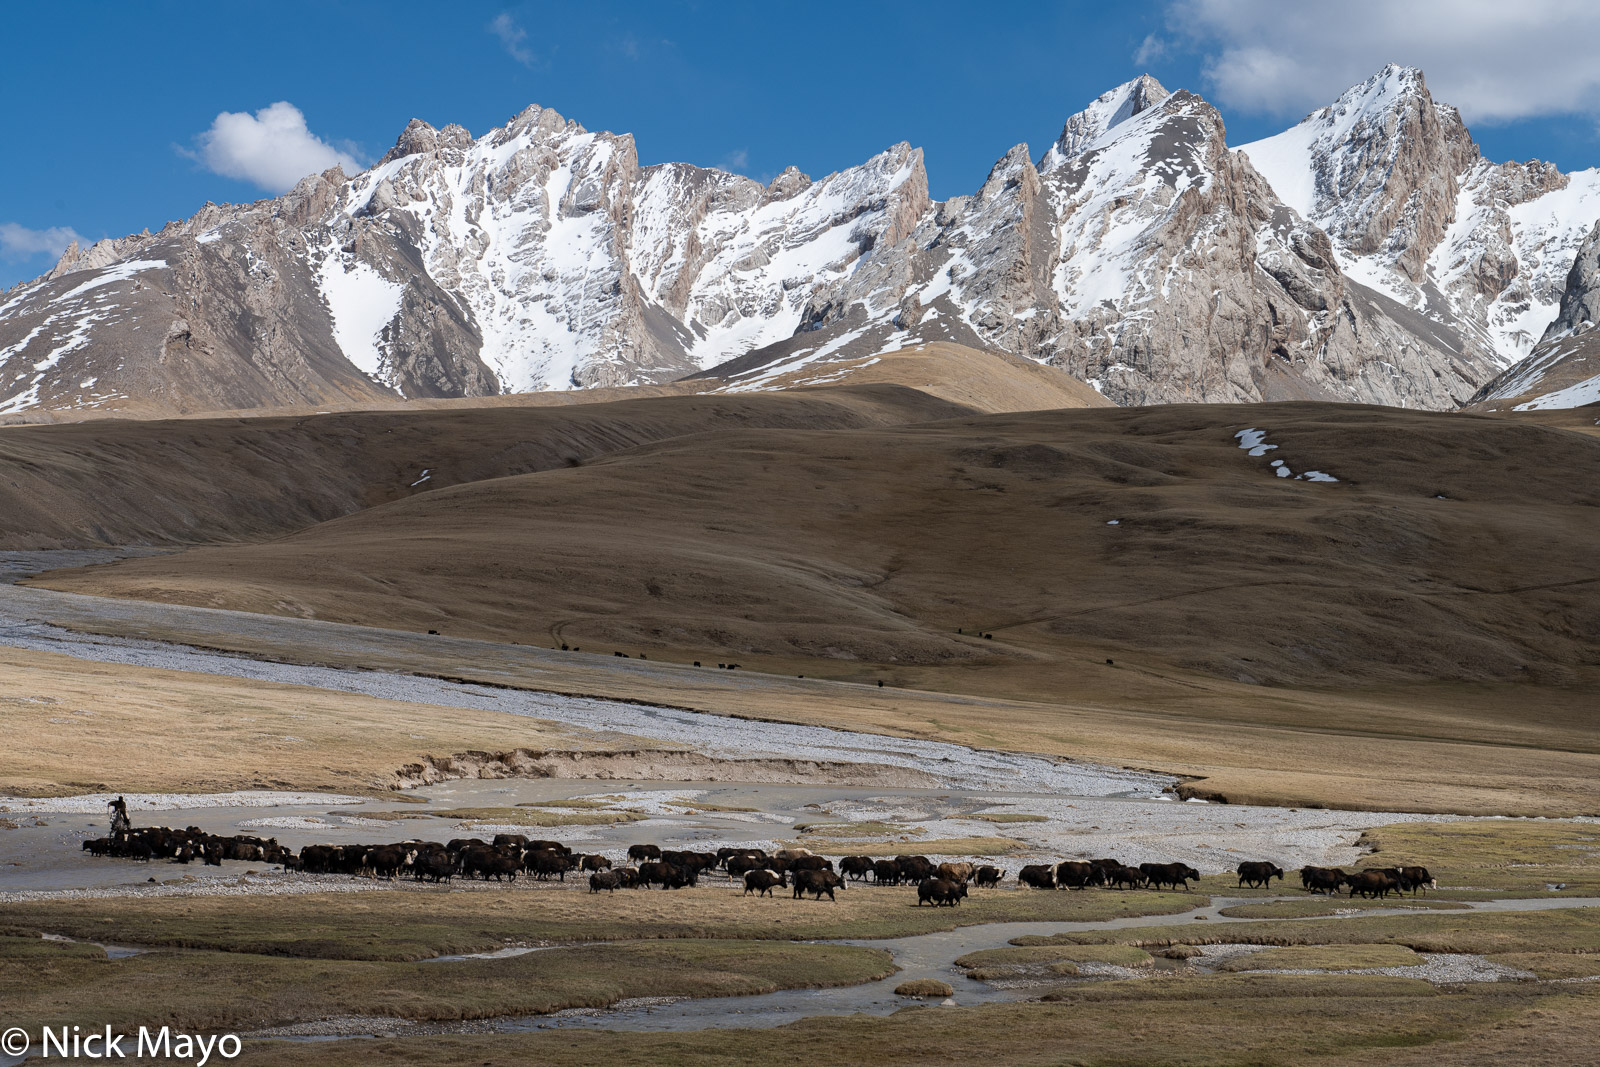 A herder on horseback driving his yaks across the Kurumduk river in the Ak Say valley of the Tien Shan mountains.